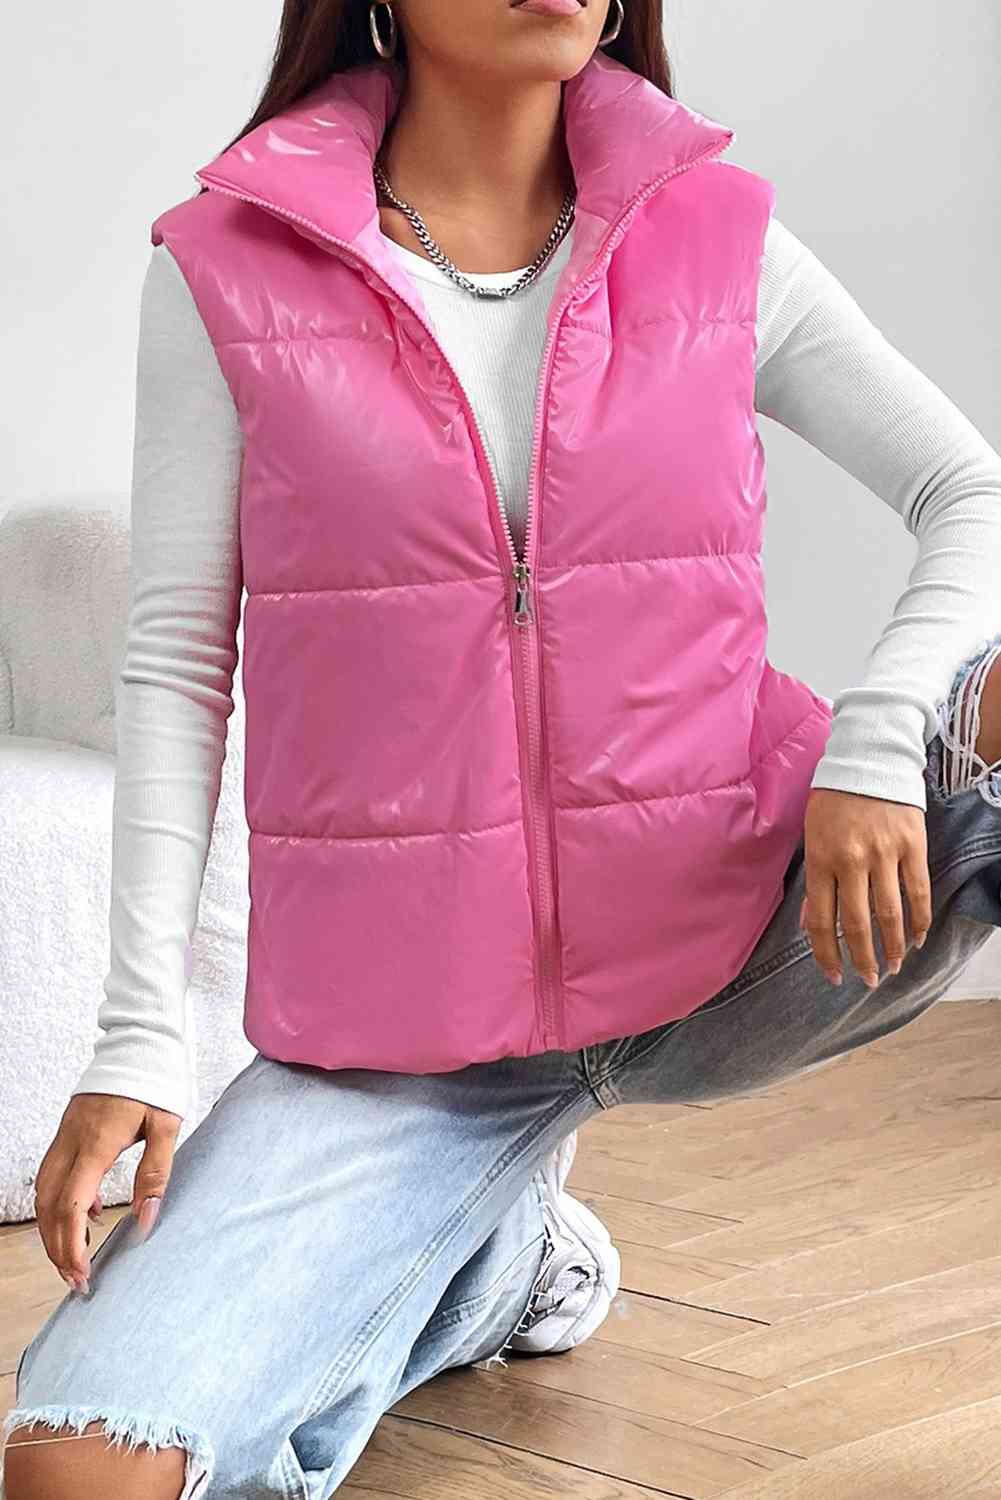 Light Gray Zip Up Collared Vest Sentient Beauty Fashions Apparel & Accessories